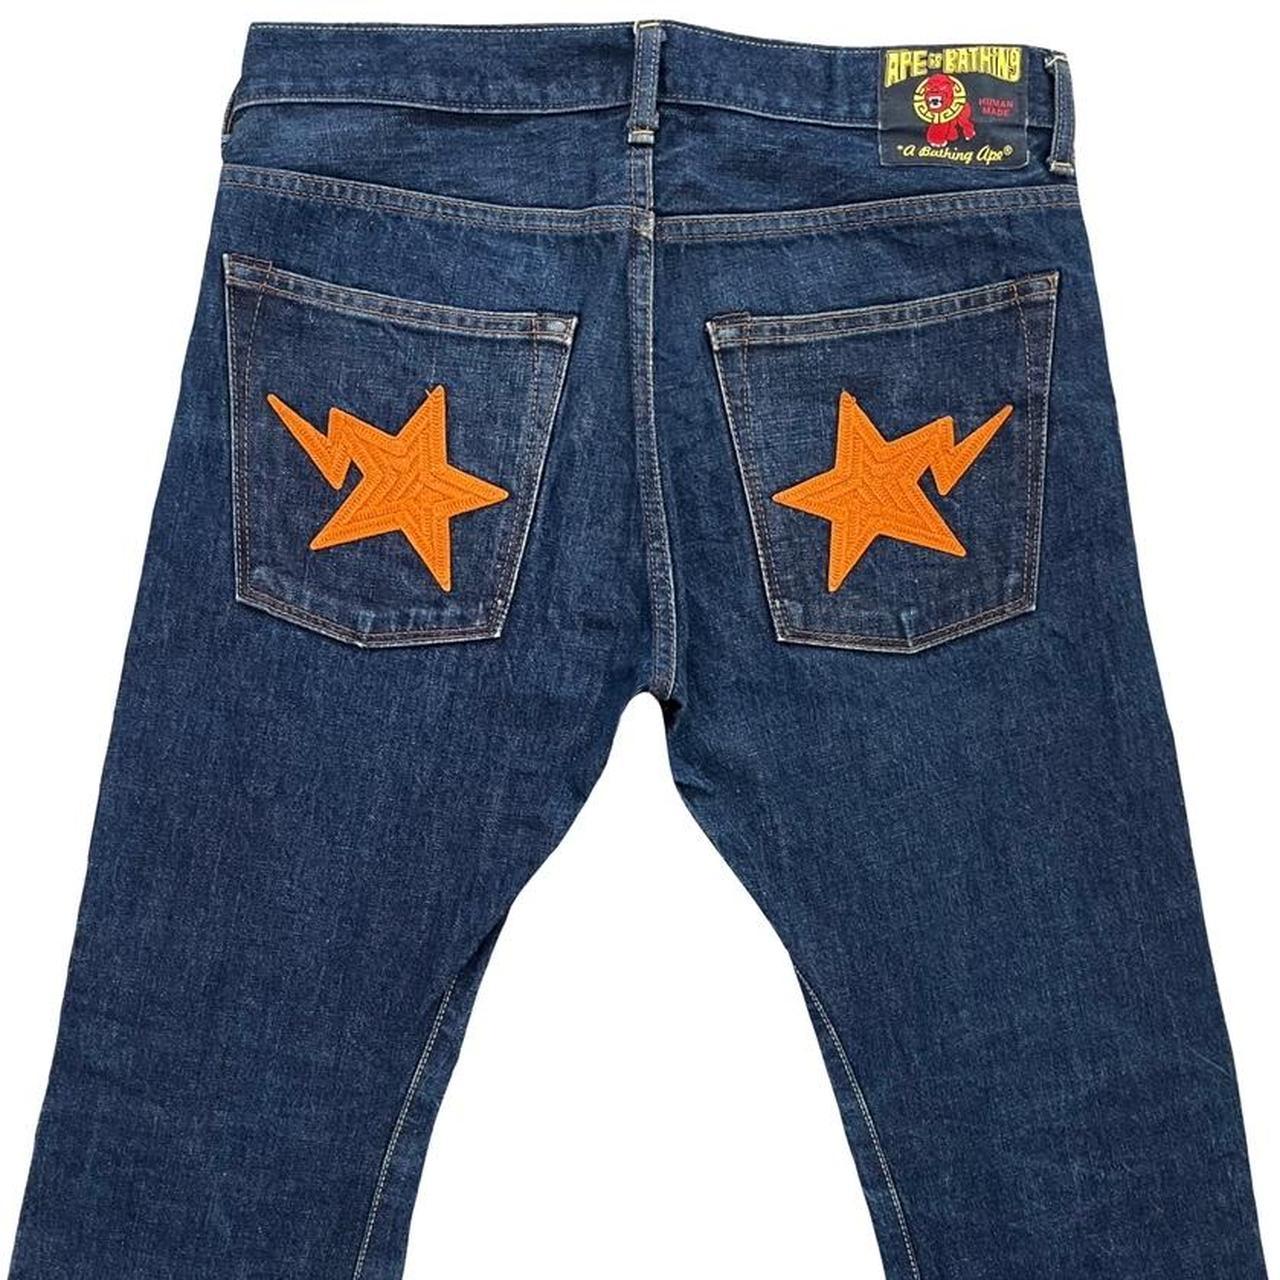 Bape Sta Jeans - Known Source